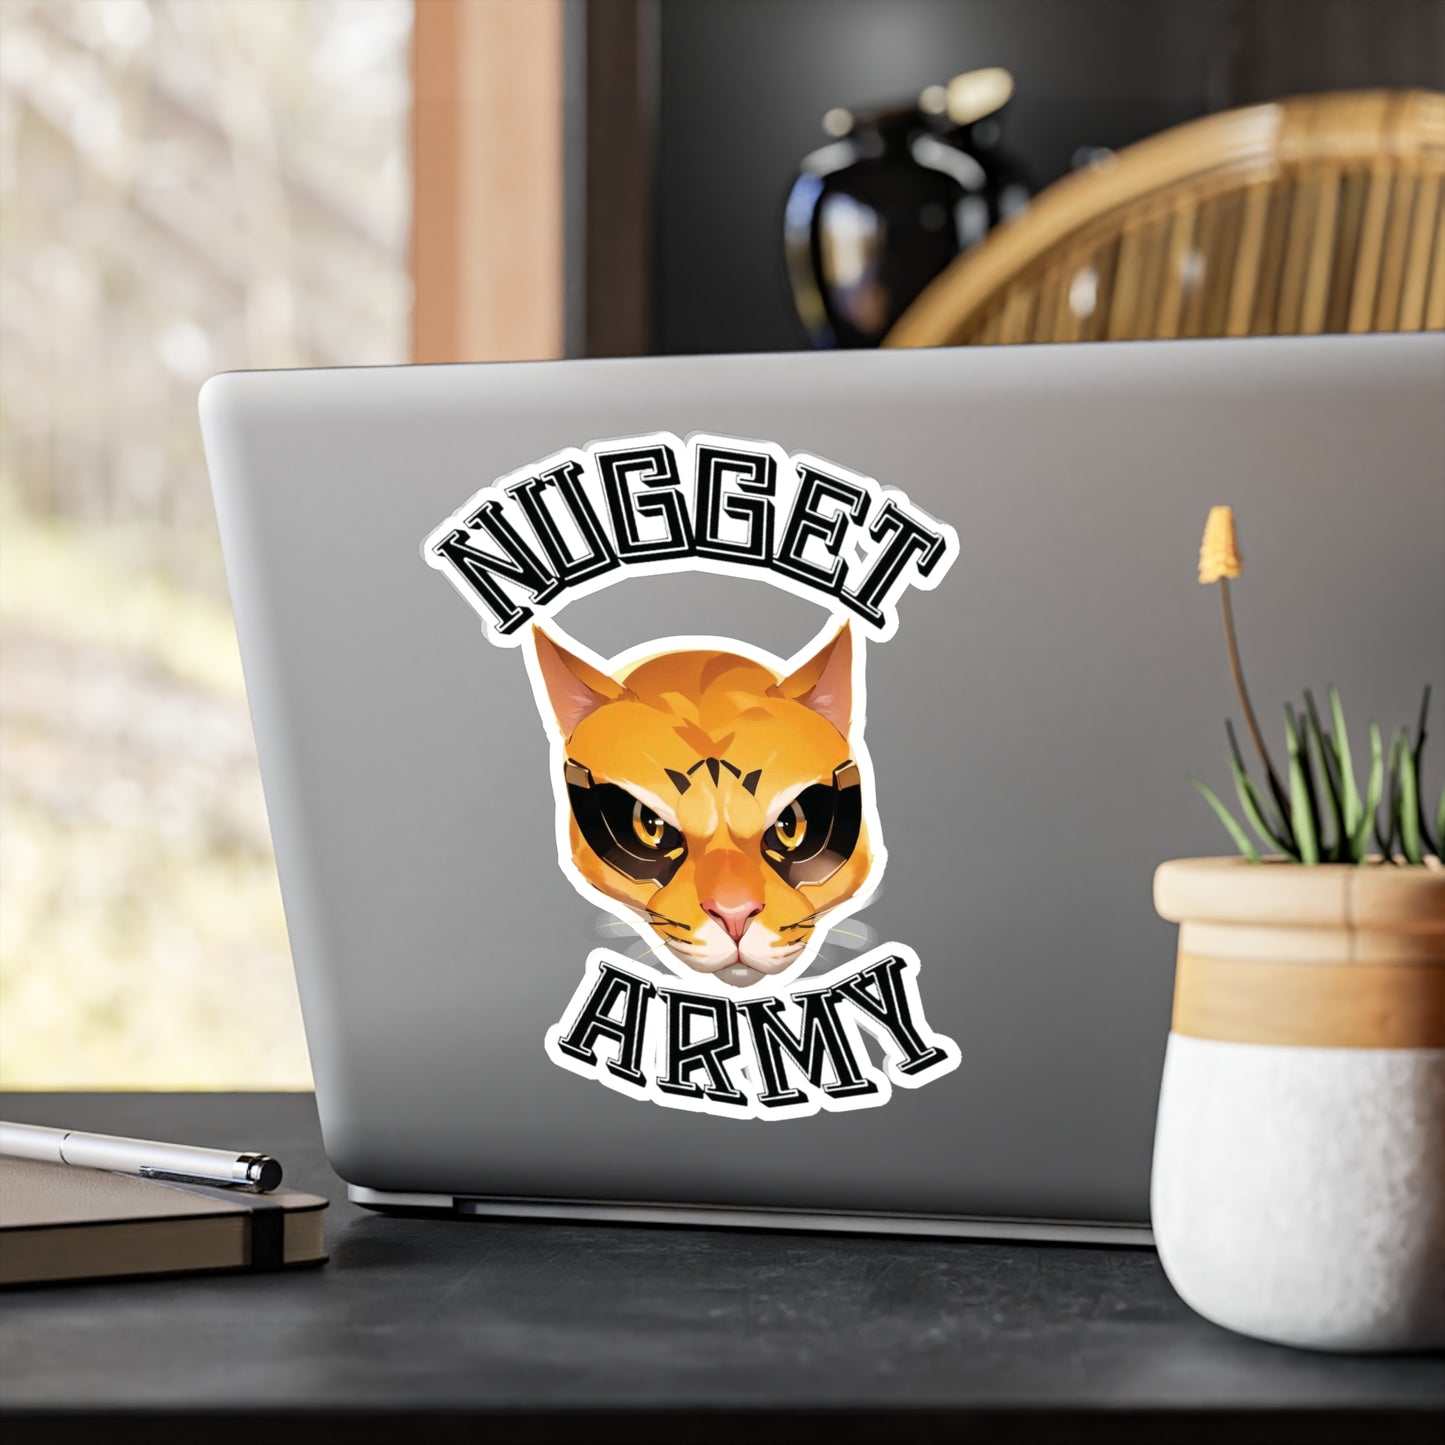 Stand out  with the  Nugget Army  available at Hey Nugget. Grab yours today!